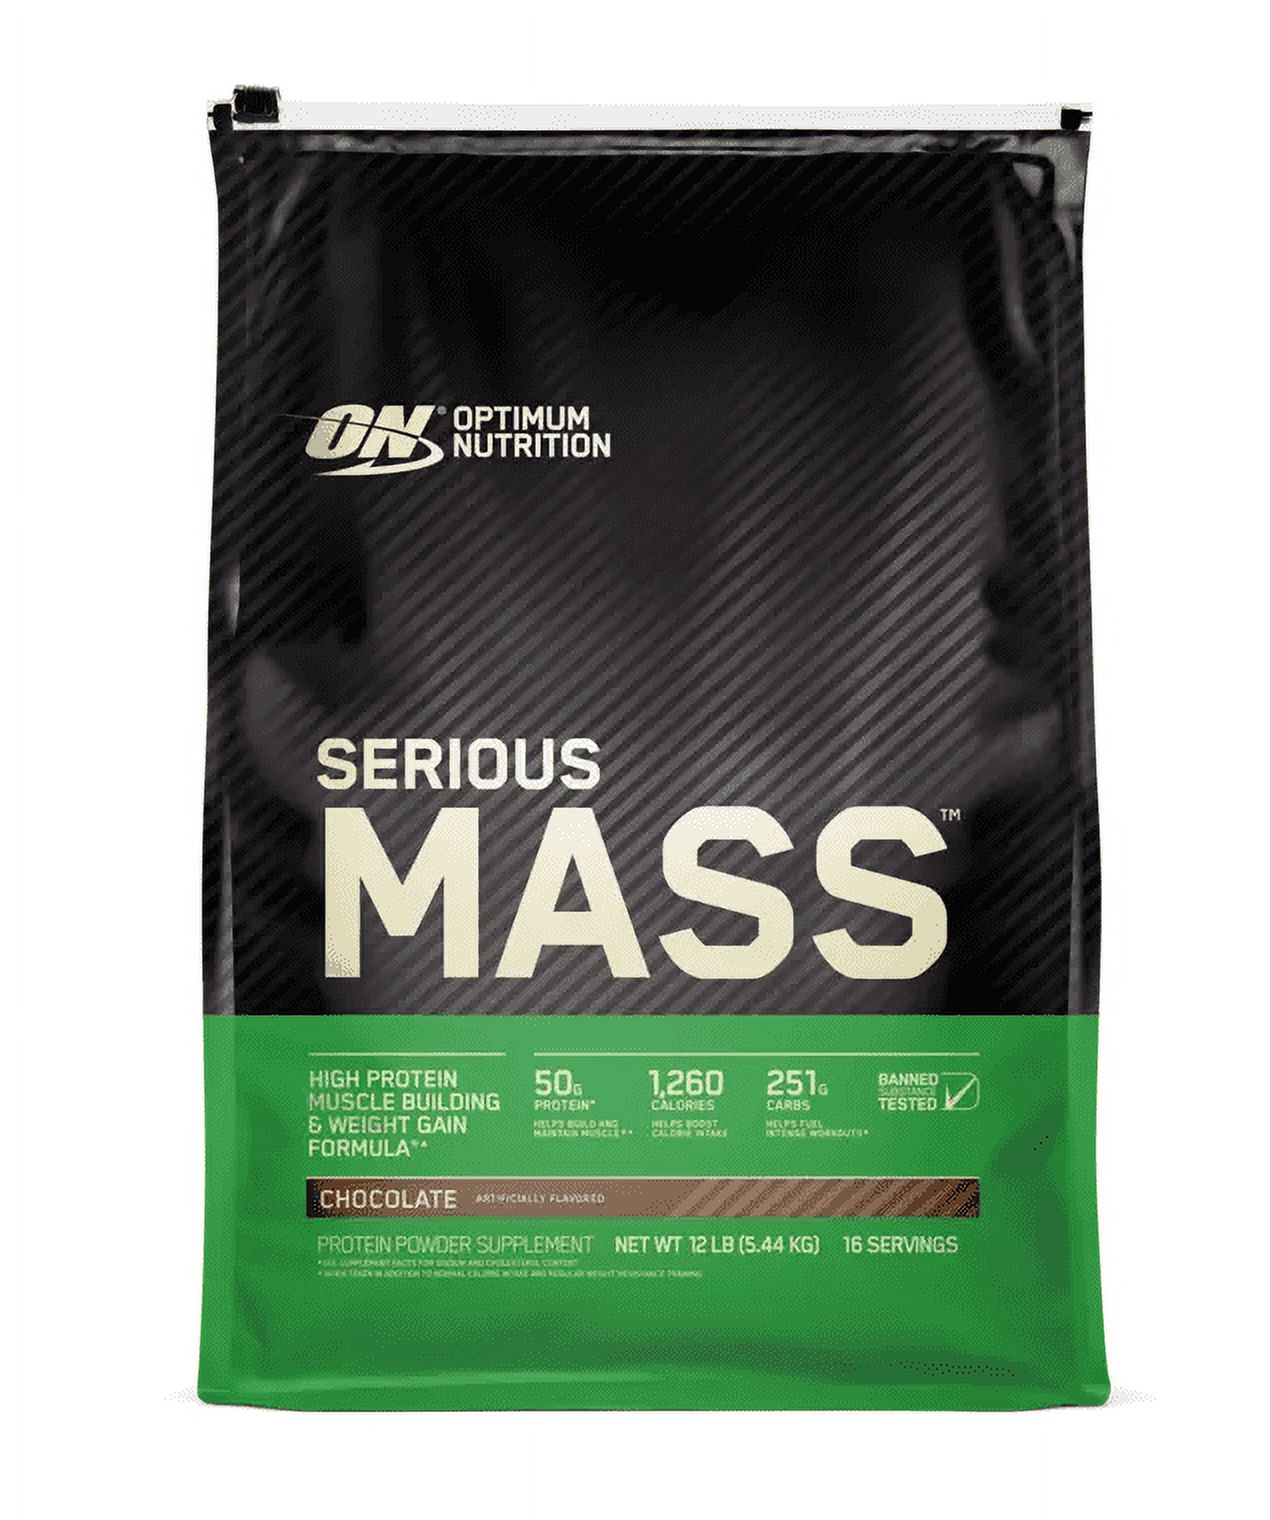 Optimum Nutrition, Serious Mass, 50g Protein Powder, Chocolate, 12 lb, 16 Servings - image 1 of 7